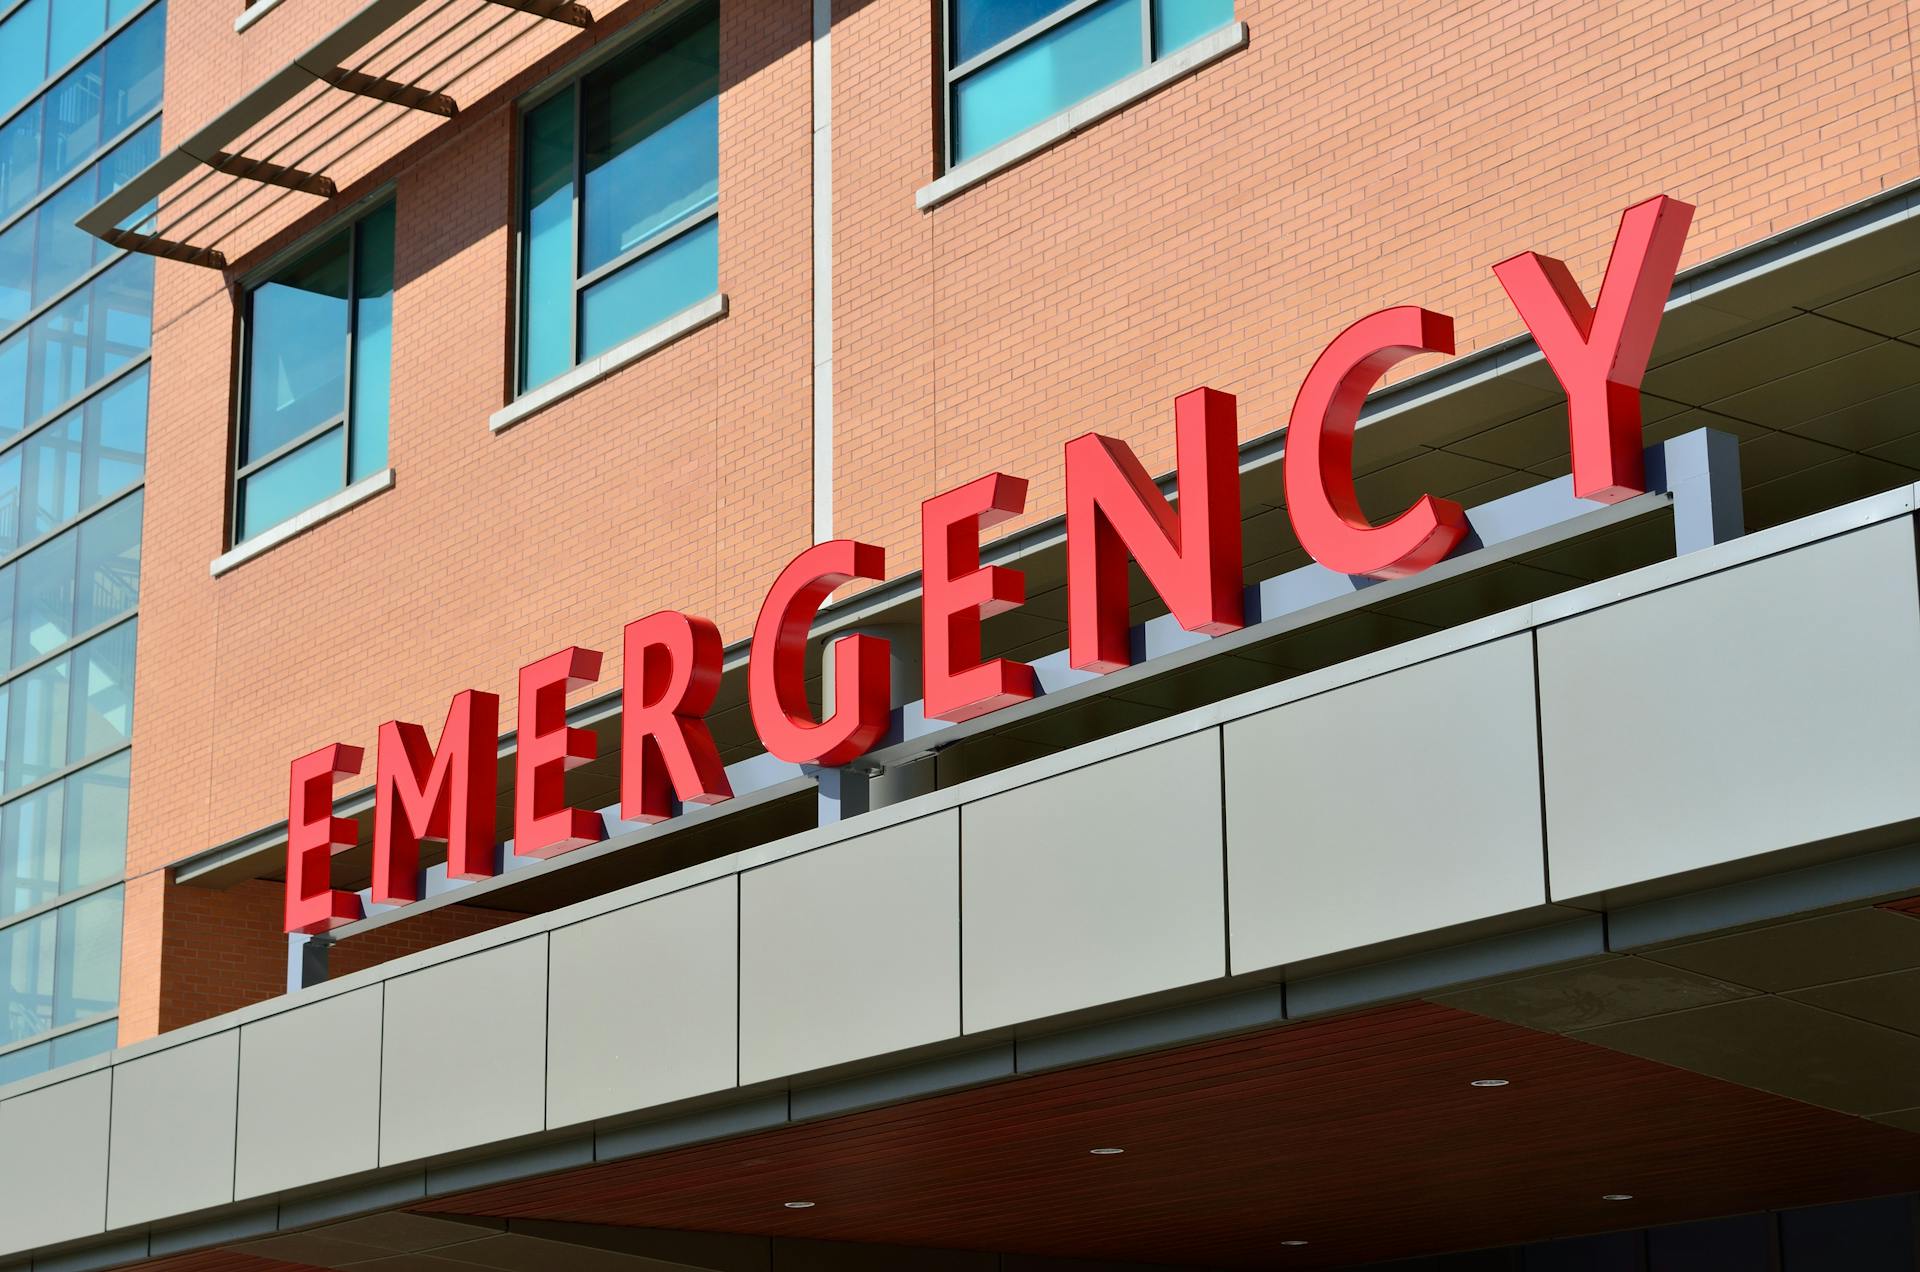 An emergency sign at a hospital | Source: Pexels